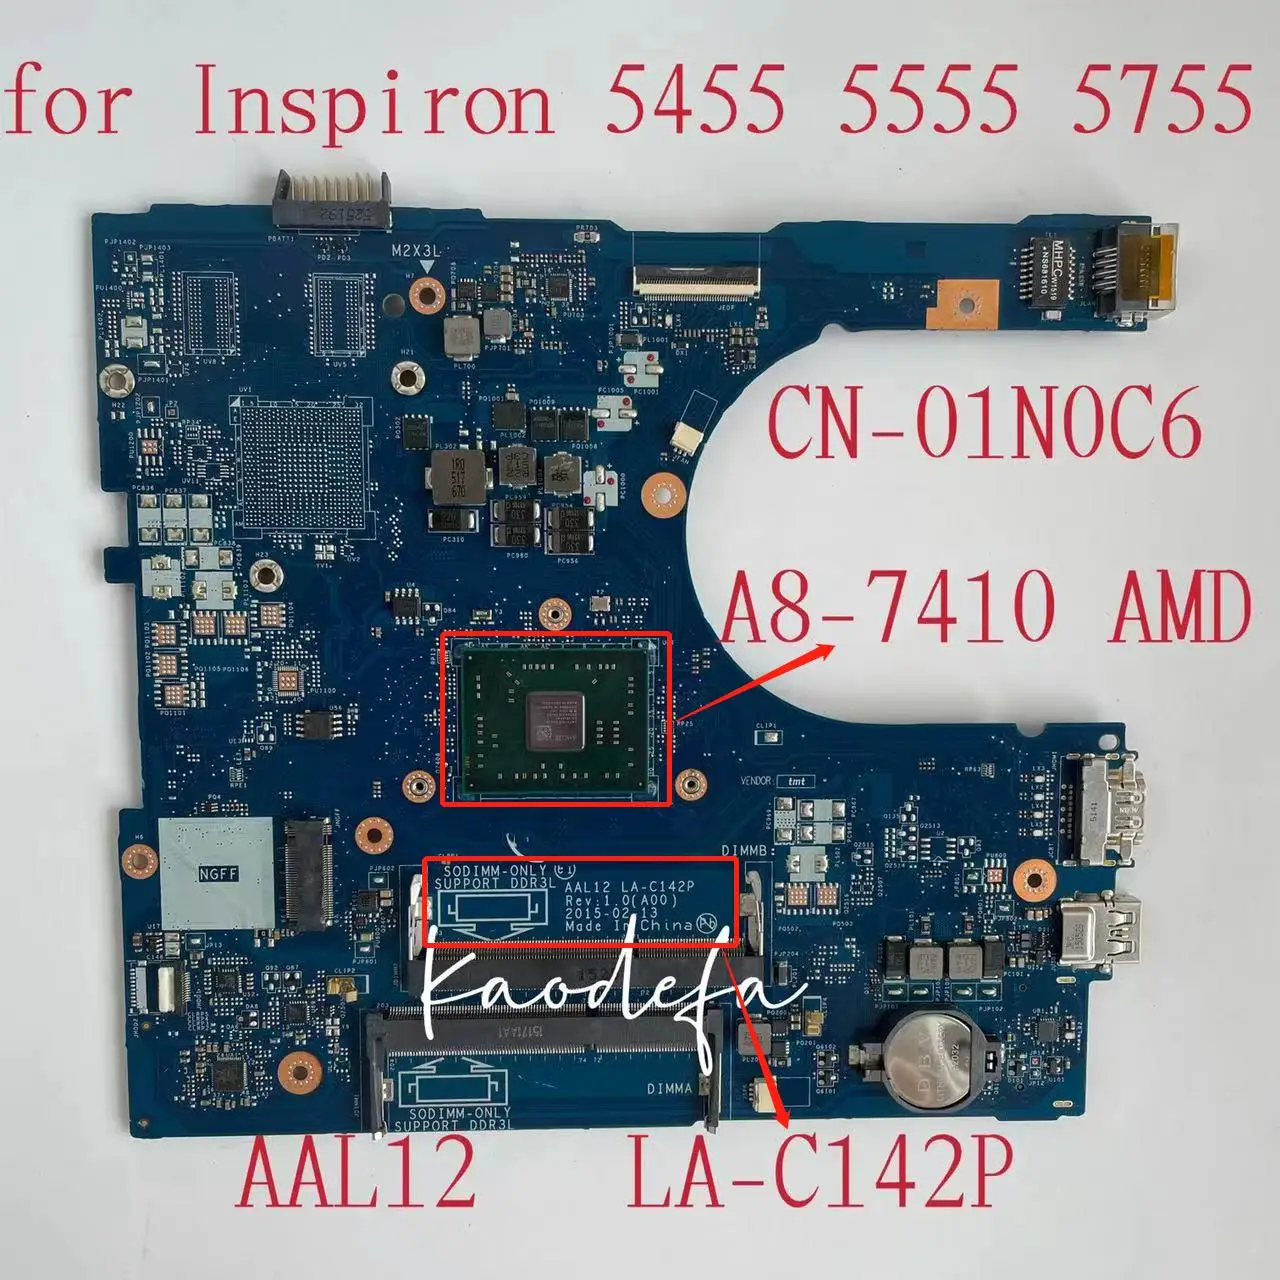 

AAL12 LA-C142P For Dell Inspiron 5455 5555 5755 Laptop Motherboard With A8-7410 CPU CN-01N0C6 01N0C6 1N0C6 100% Fully Tested OK